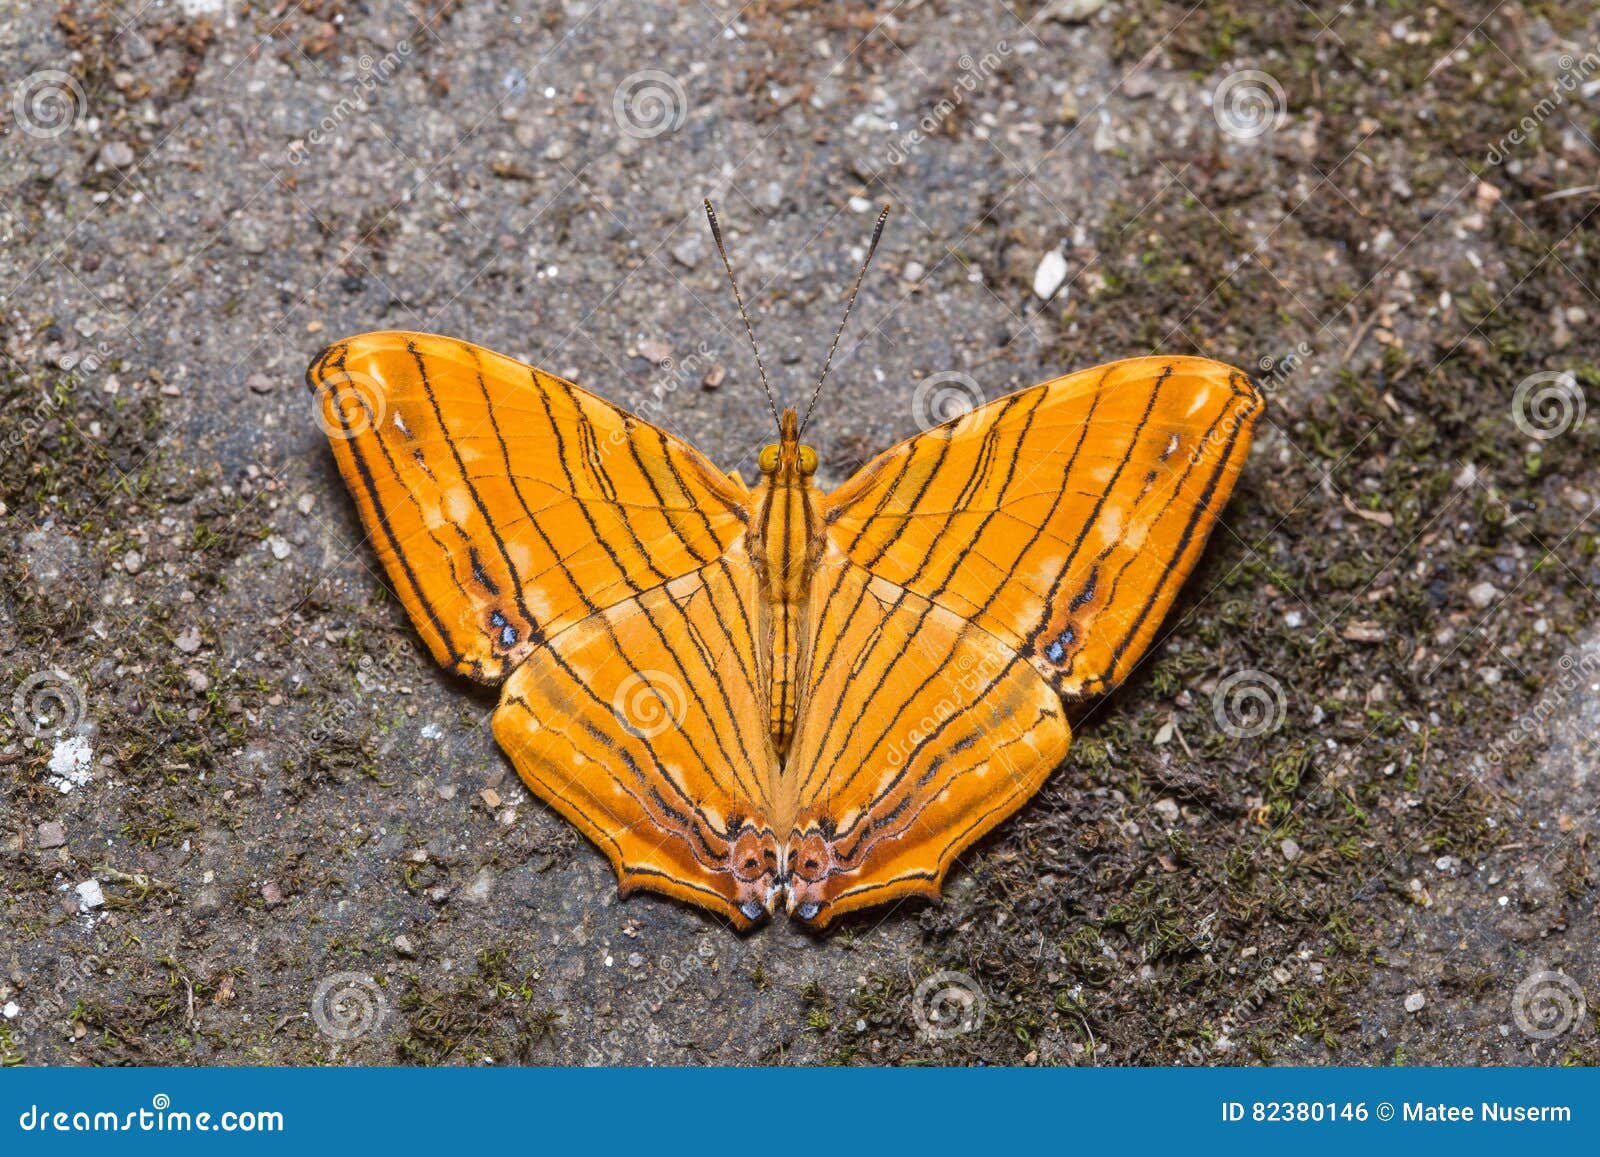 common maplet butterfly